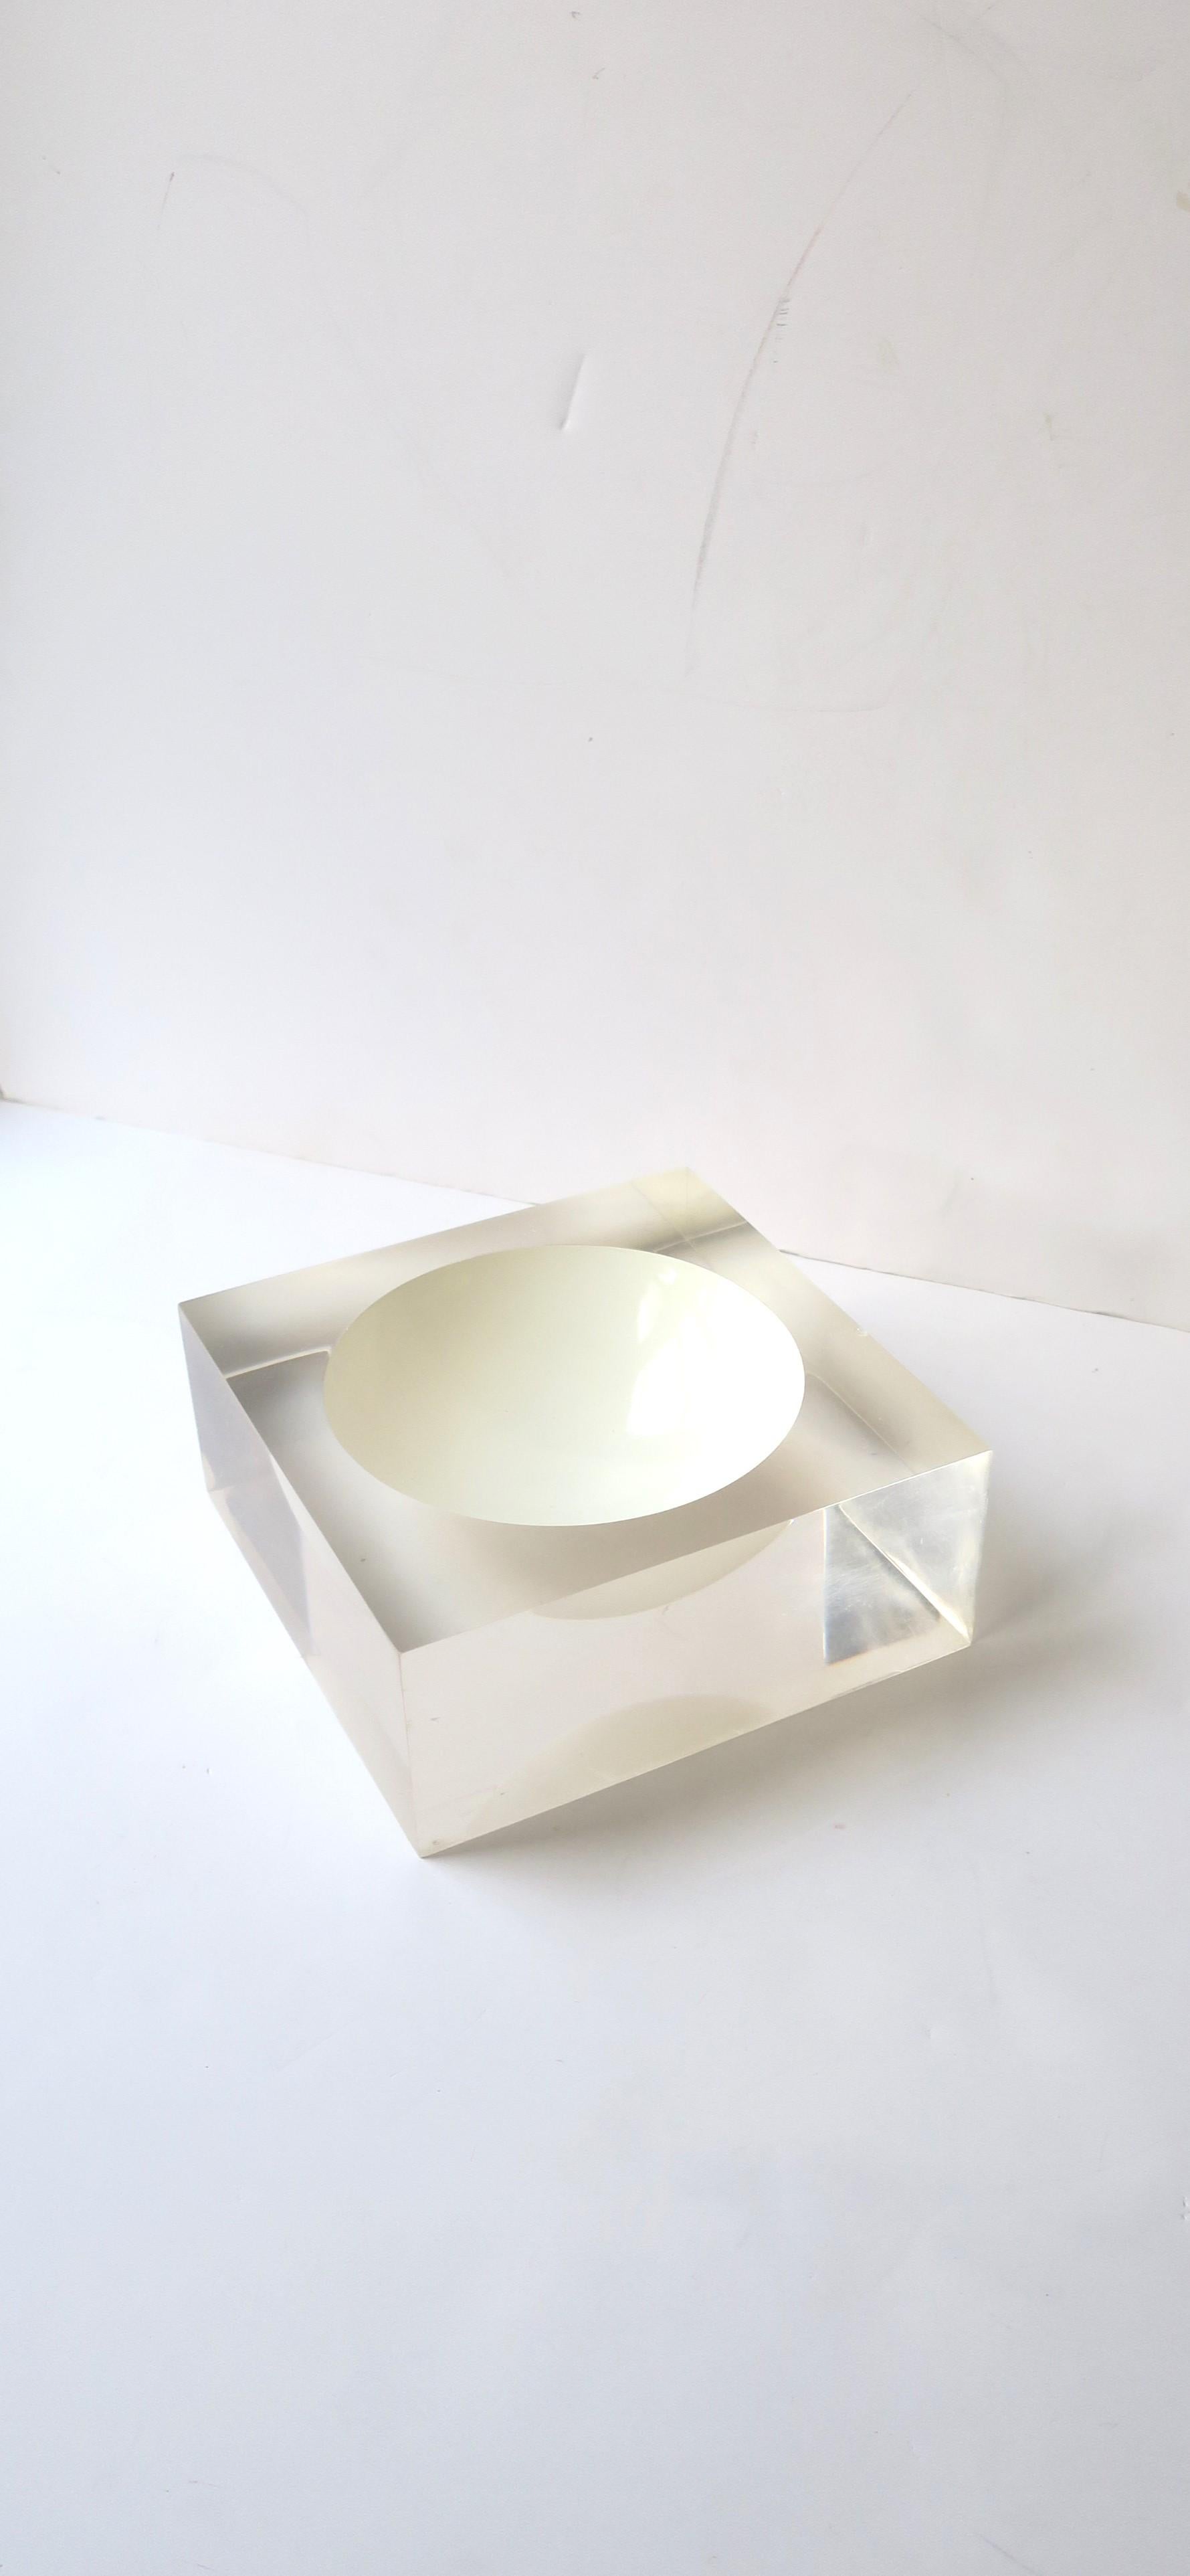 A substantial square Lucite vessel, bowl, or vide-poche (catchall) with white enamel center, in the modern style or Postmodern period, circa late-20th century. Great as a standalone piece, candy dish, or its intended use - a catchall for keys, coin